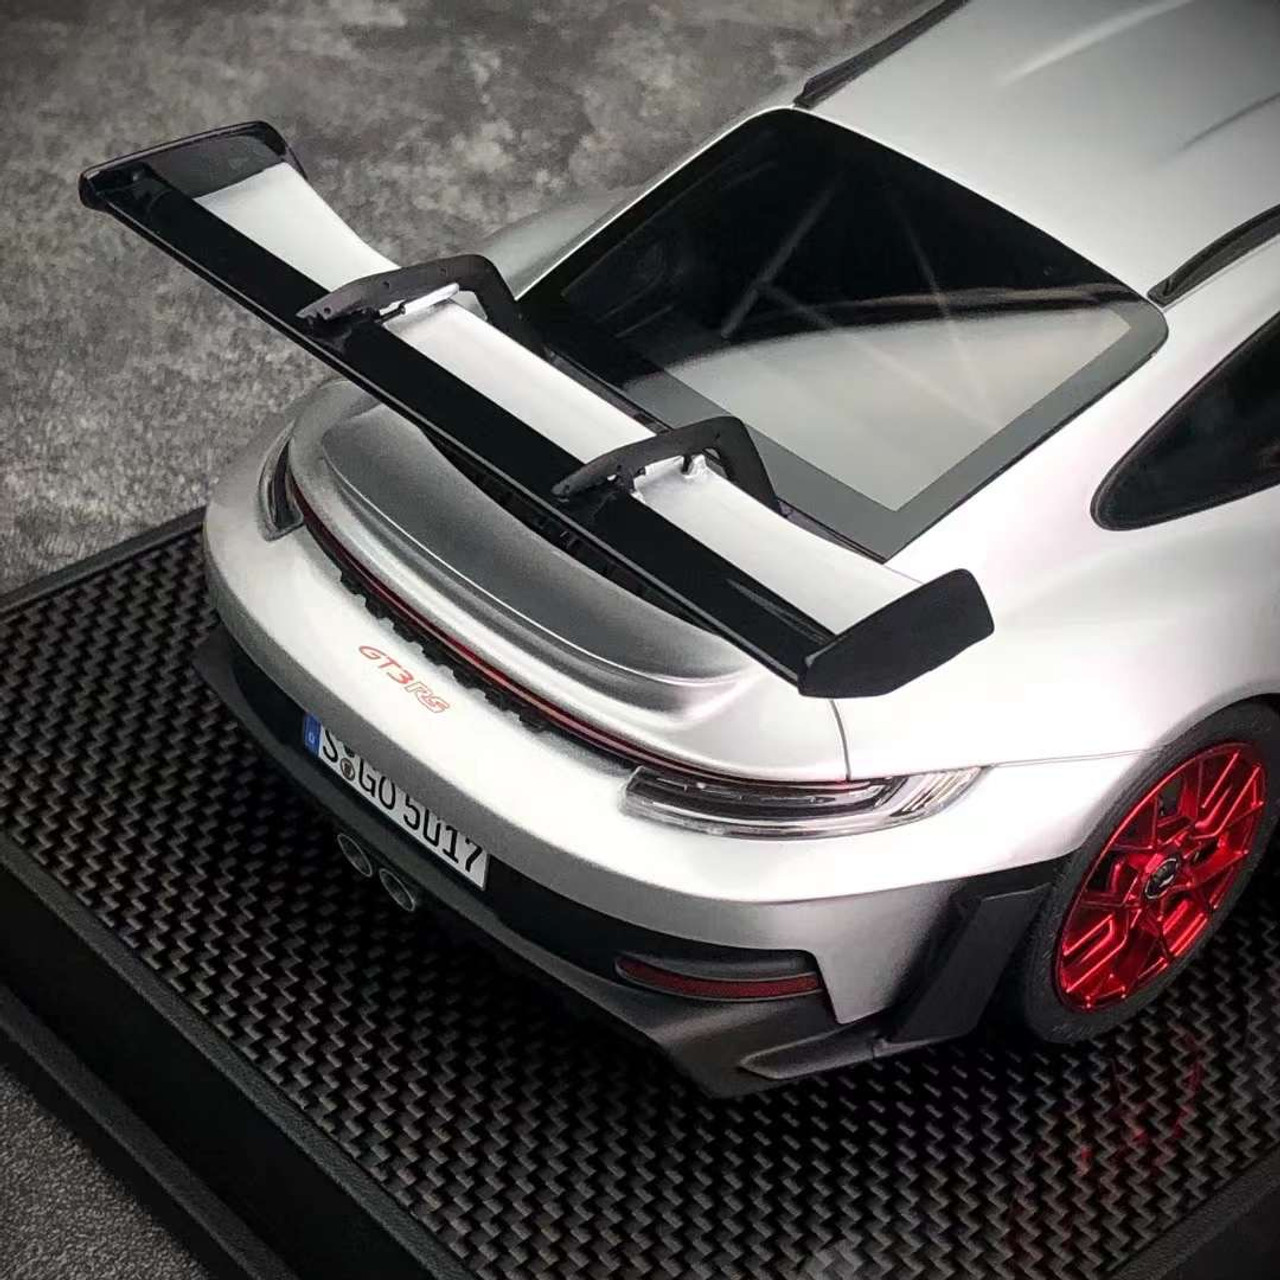 1/18 TP Timothy & Pierre Porsche 911 992 GT3 RS (Silverstone Grey with Red Wheels) Resin Car Model Limited 49 Pieces